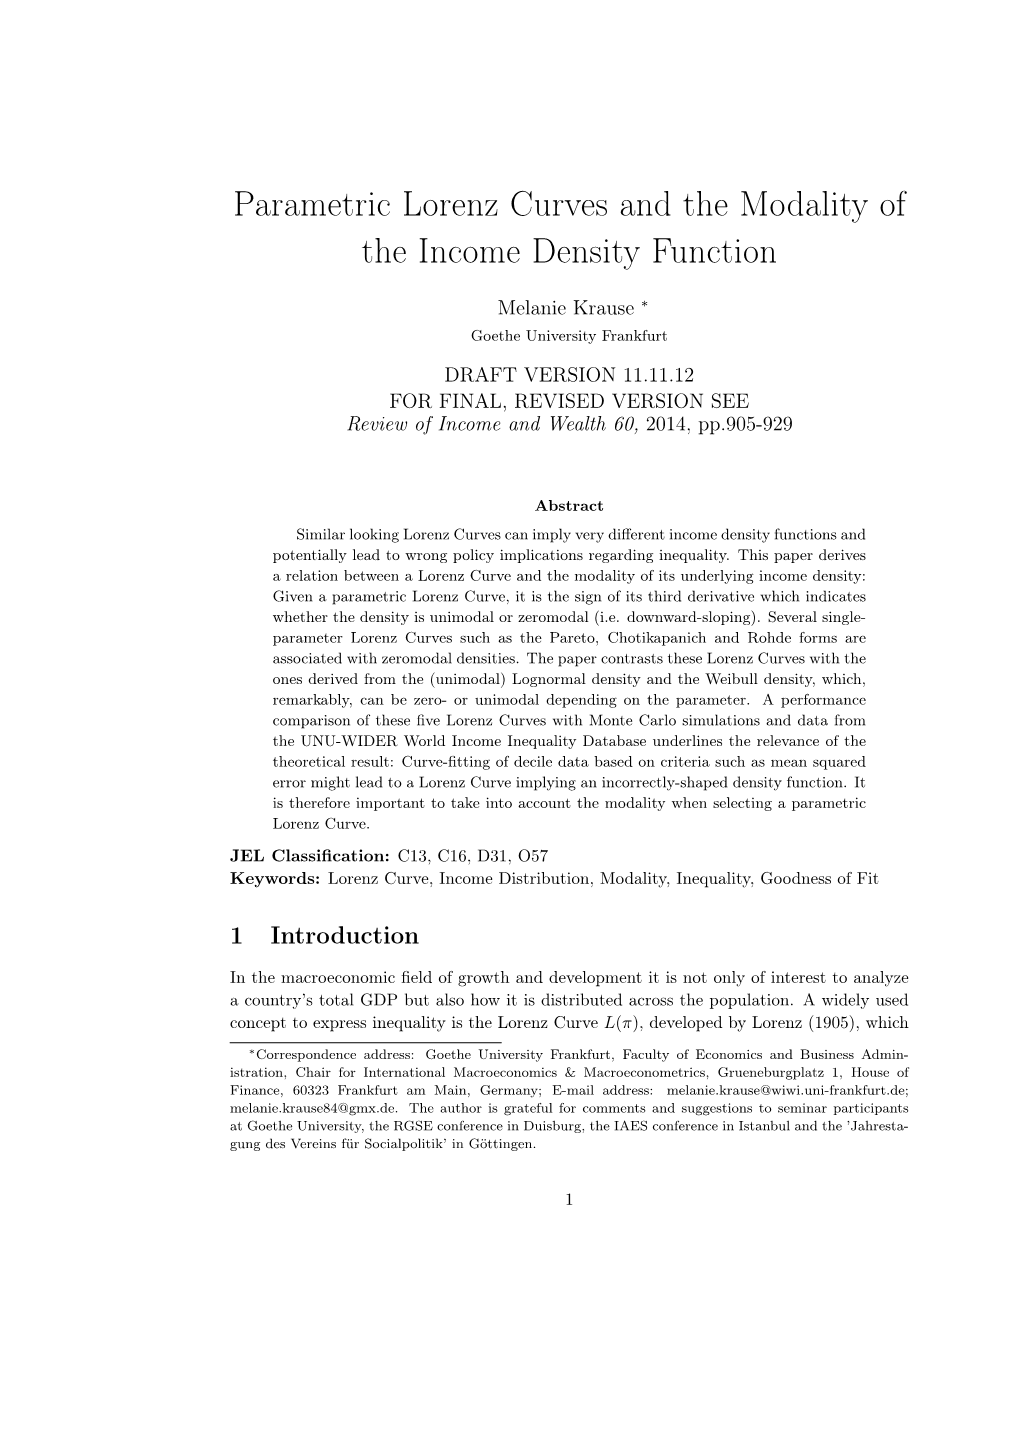 Parametric Lorenz Curves and the Modality of the Income Density Function